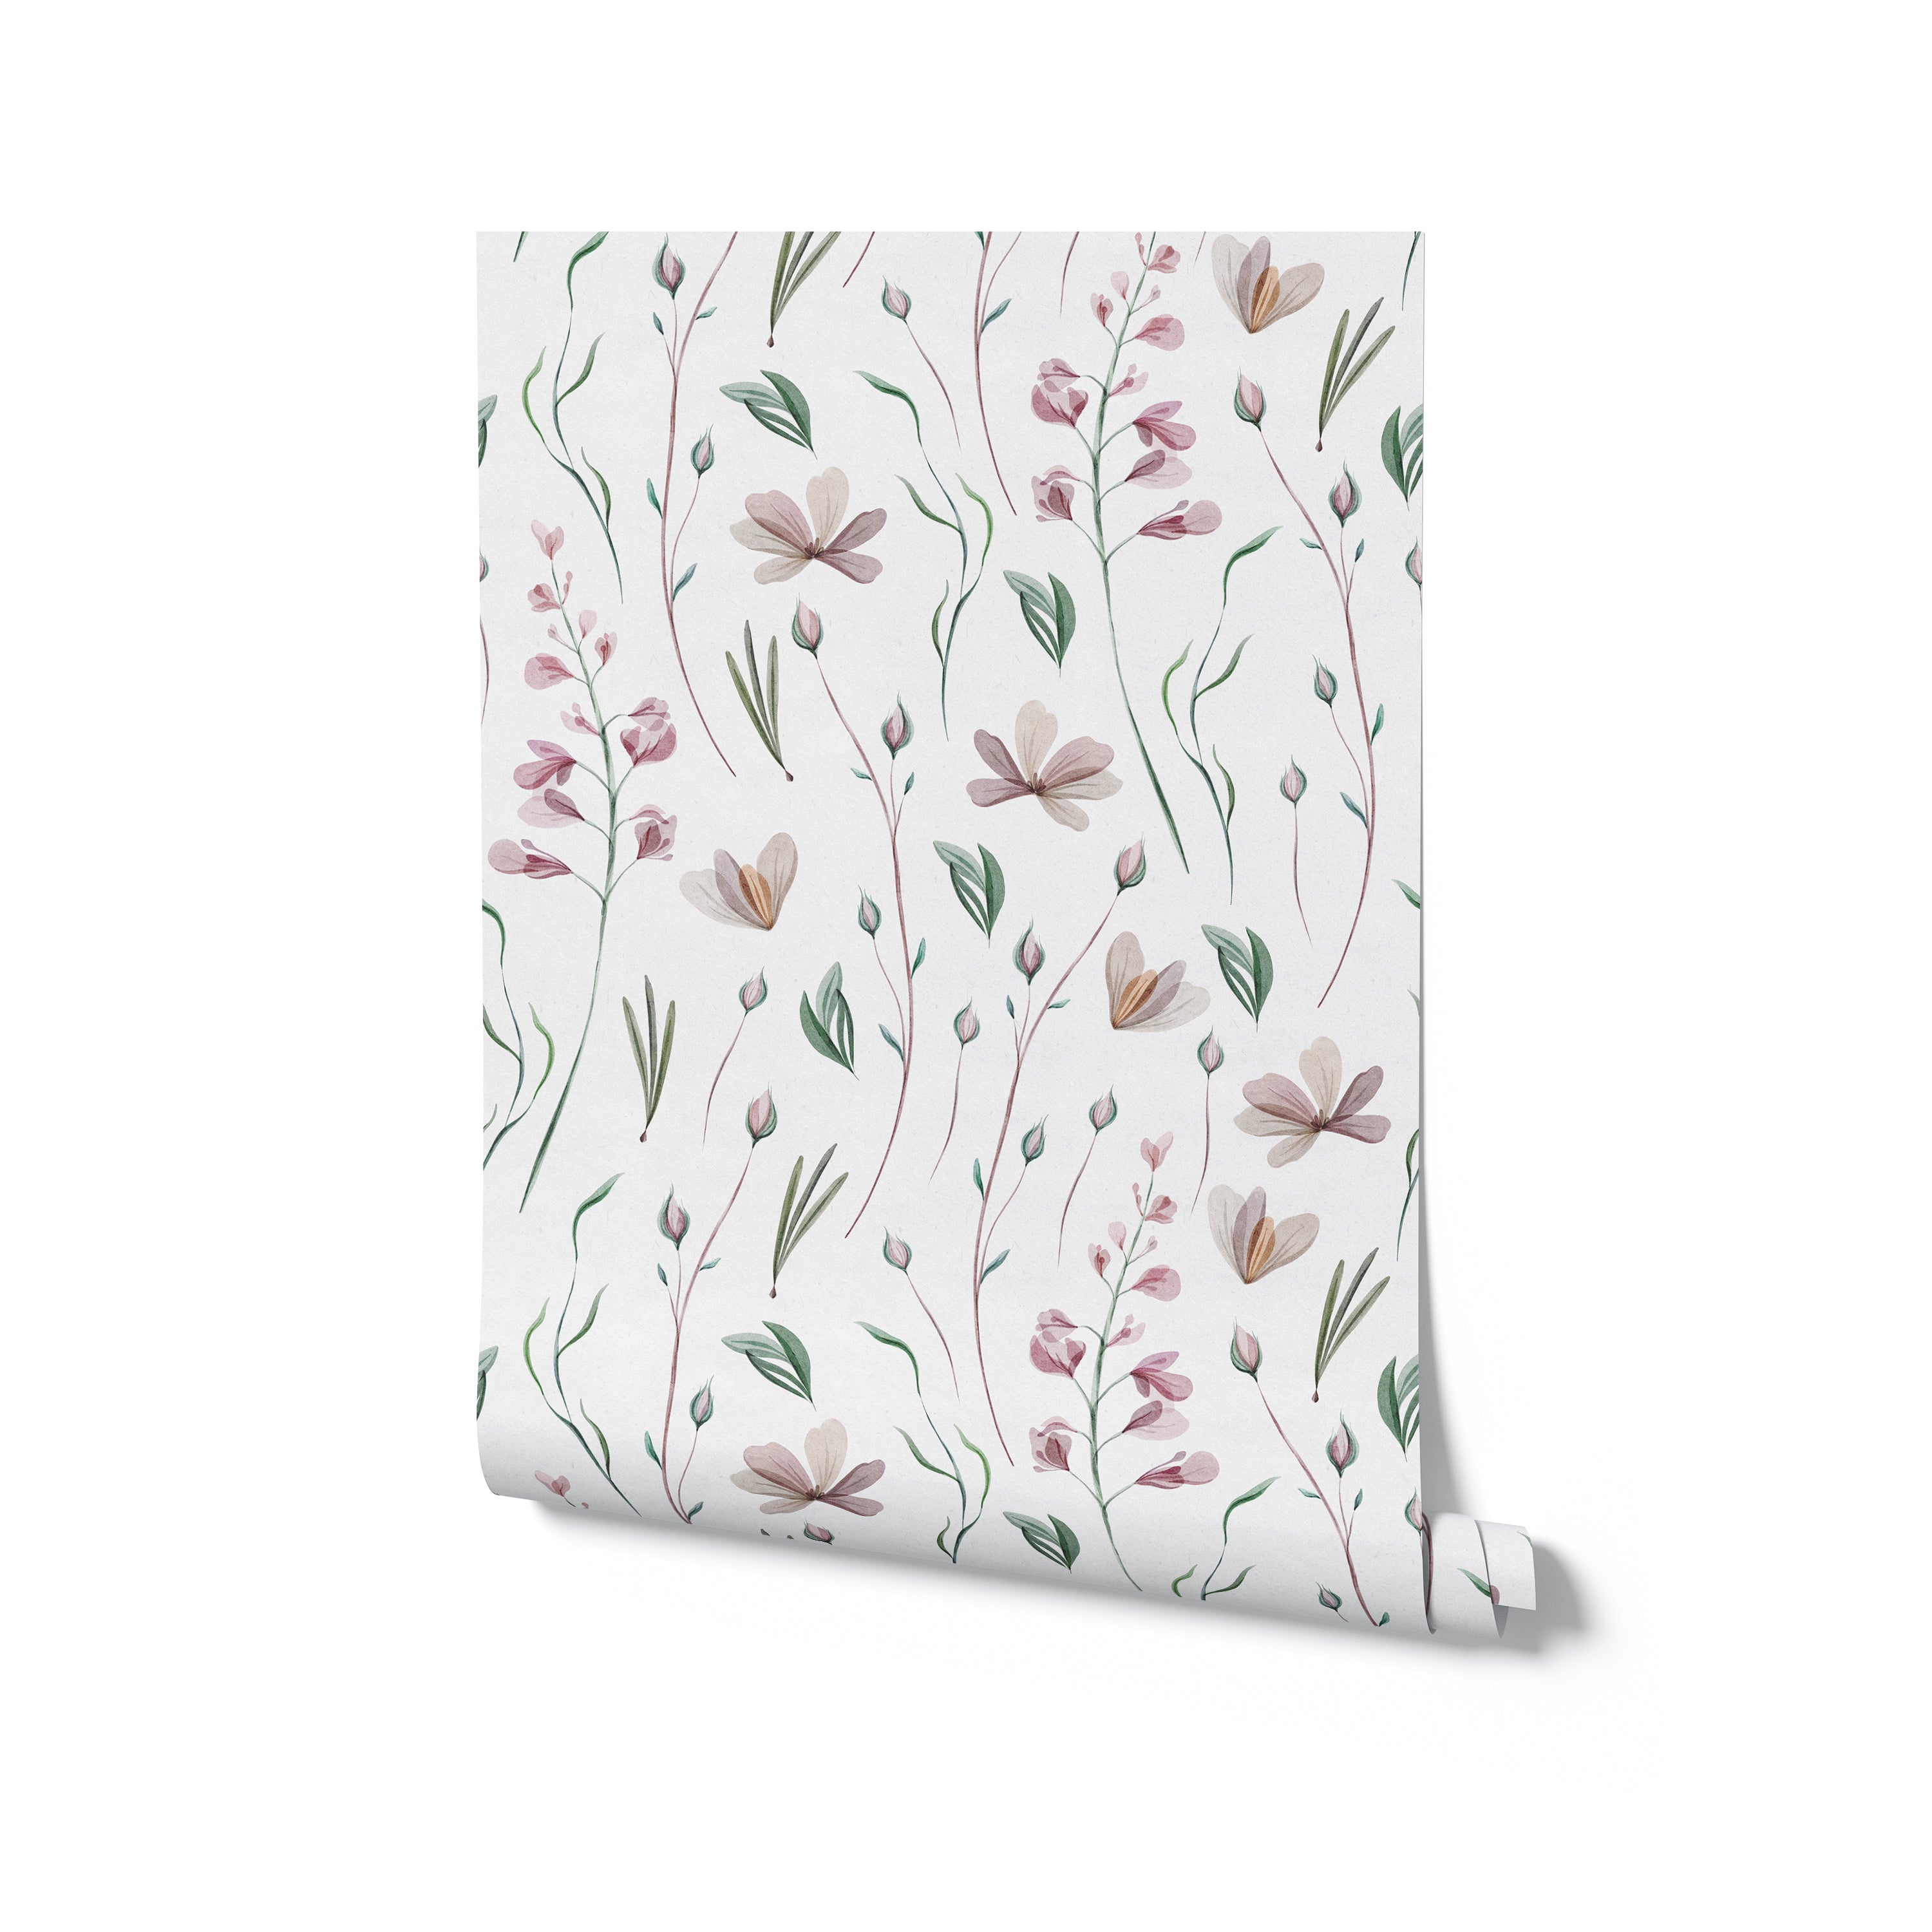 Floral Wallpaper: Peel & Stick or Removable